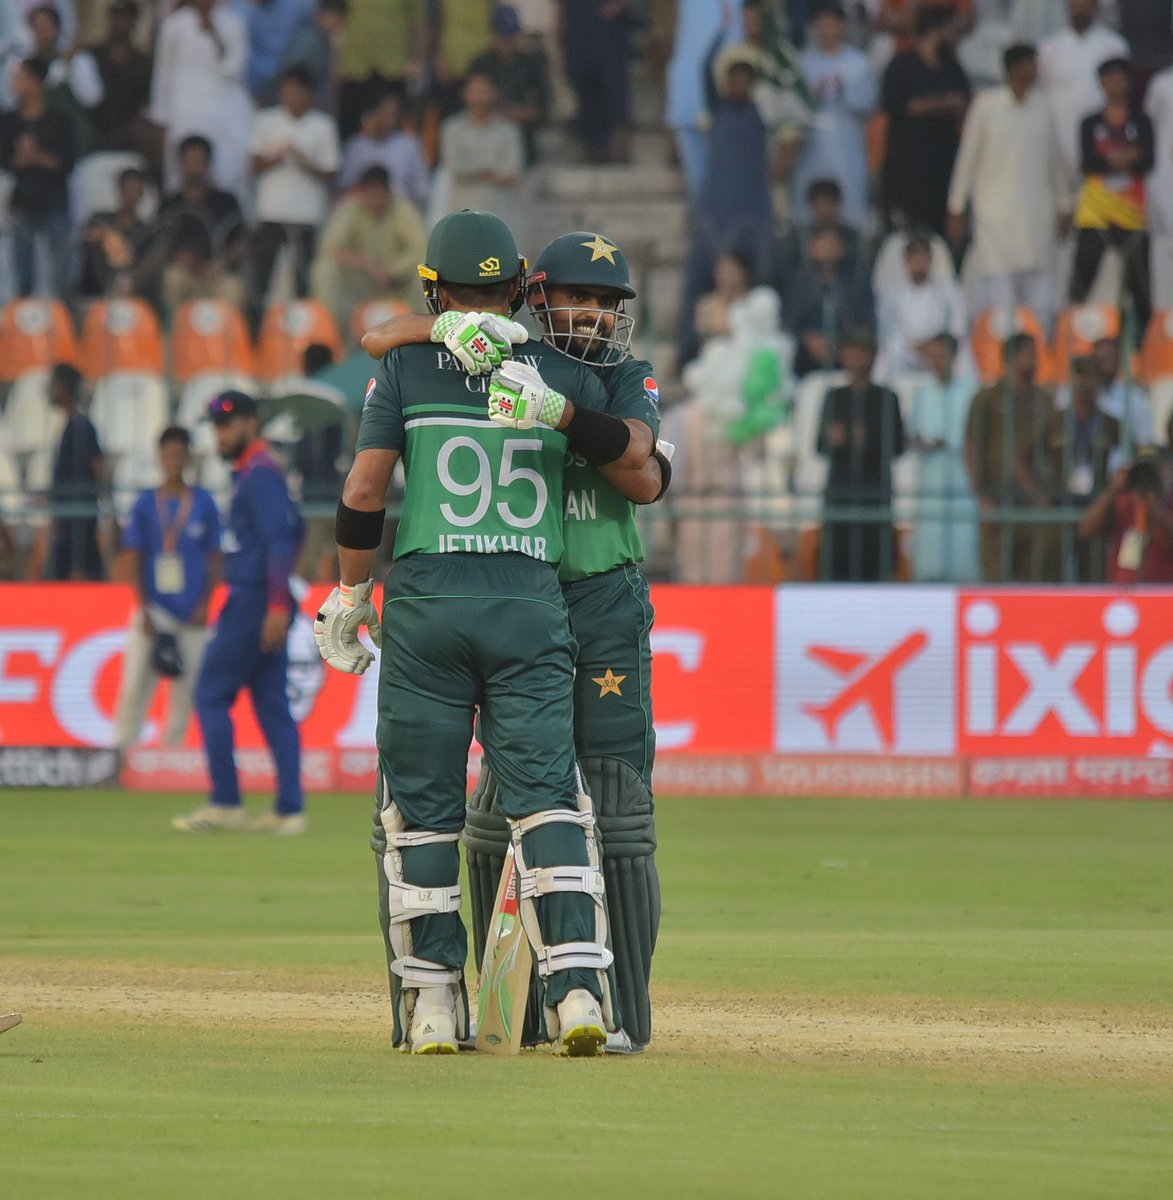 Alhamdulillah, an unbelievable feeling crossing the triple figures for the first time in green wearing the ⭐️ on my heart. Truly humbled by all the love. An amazing day having the best seat to watching the master at work @babarazam258. Great start to the tournament for us!